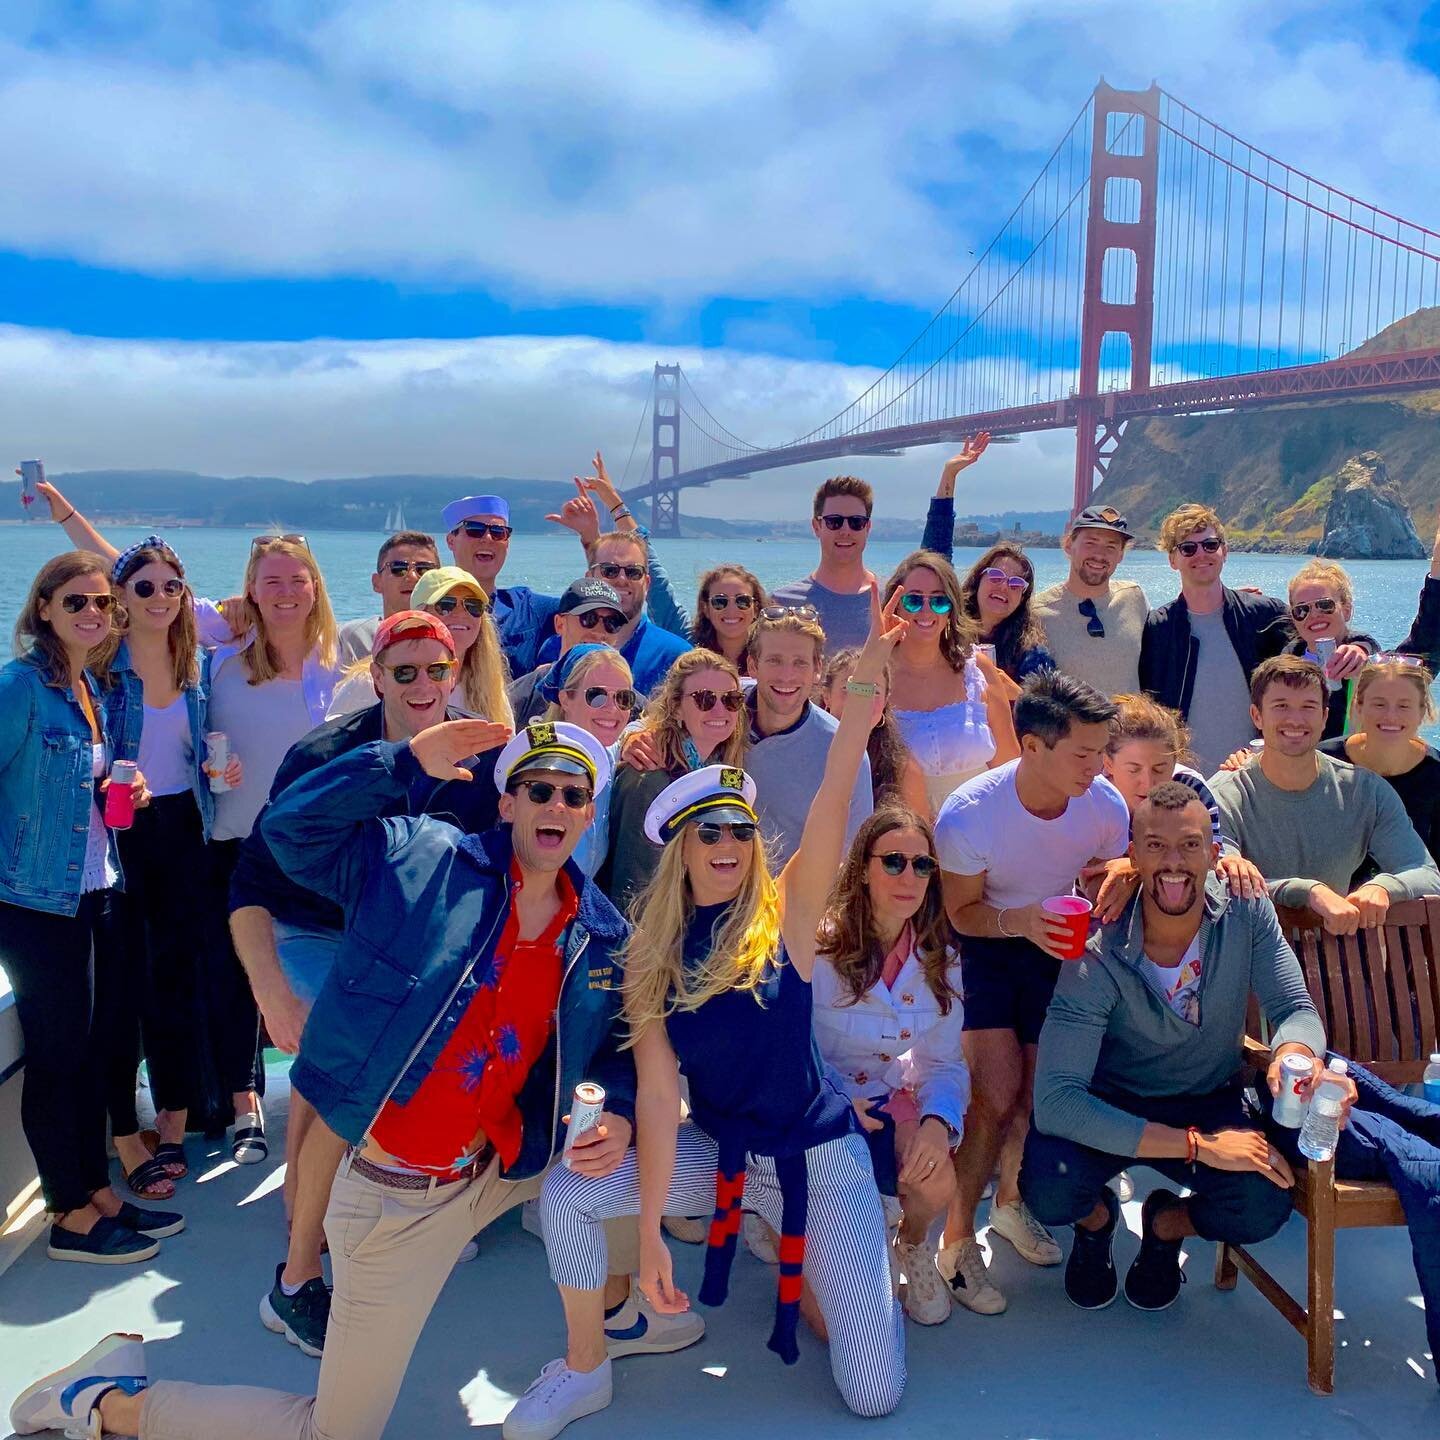 Charter season is in full swing! With fleet week right around the corner and plenty of sunshine ahead, make sure to book your charter early this year. 
#sf
#sfbay 
#goldengatebridge